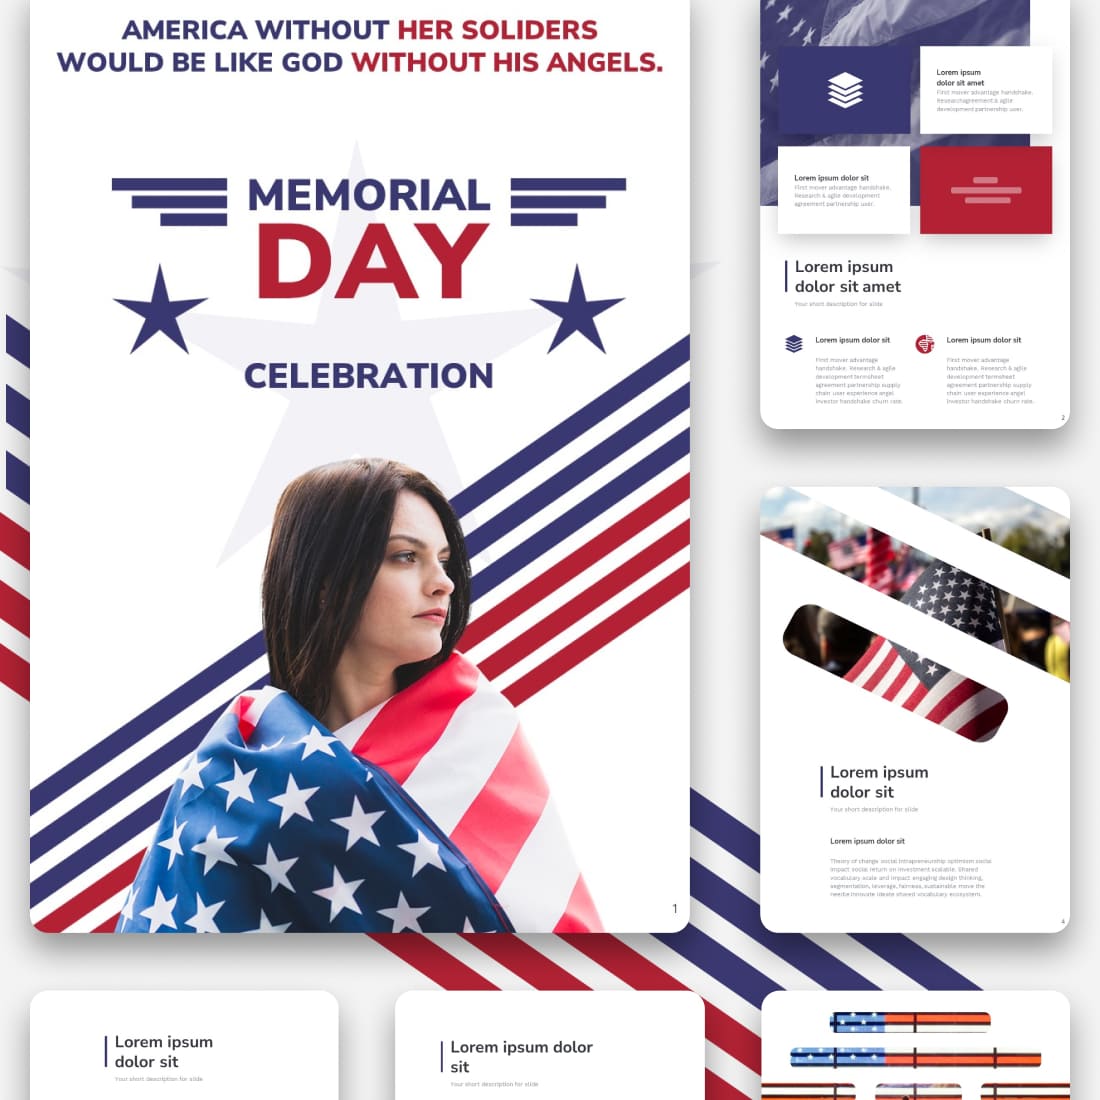 Google slides template "America without her soliders, Would be like god without his angels".